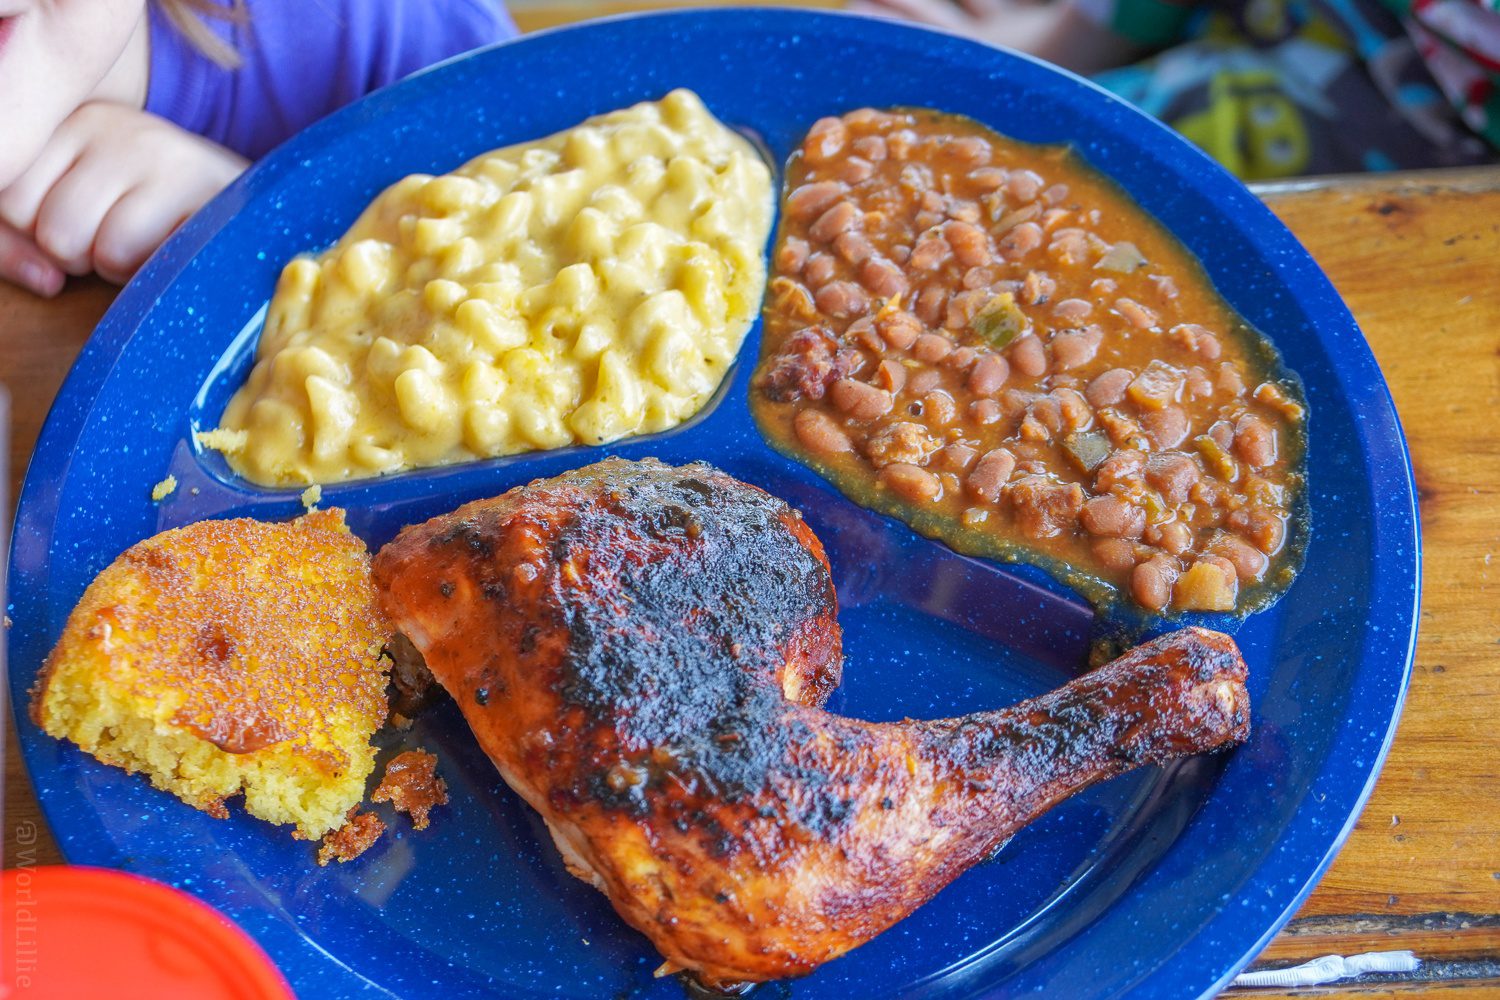 BBQ for kids: Mac, beans, and chicken